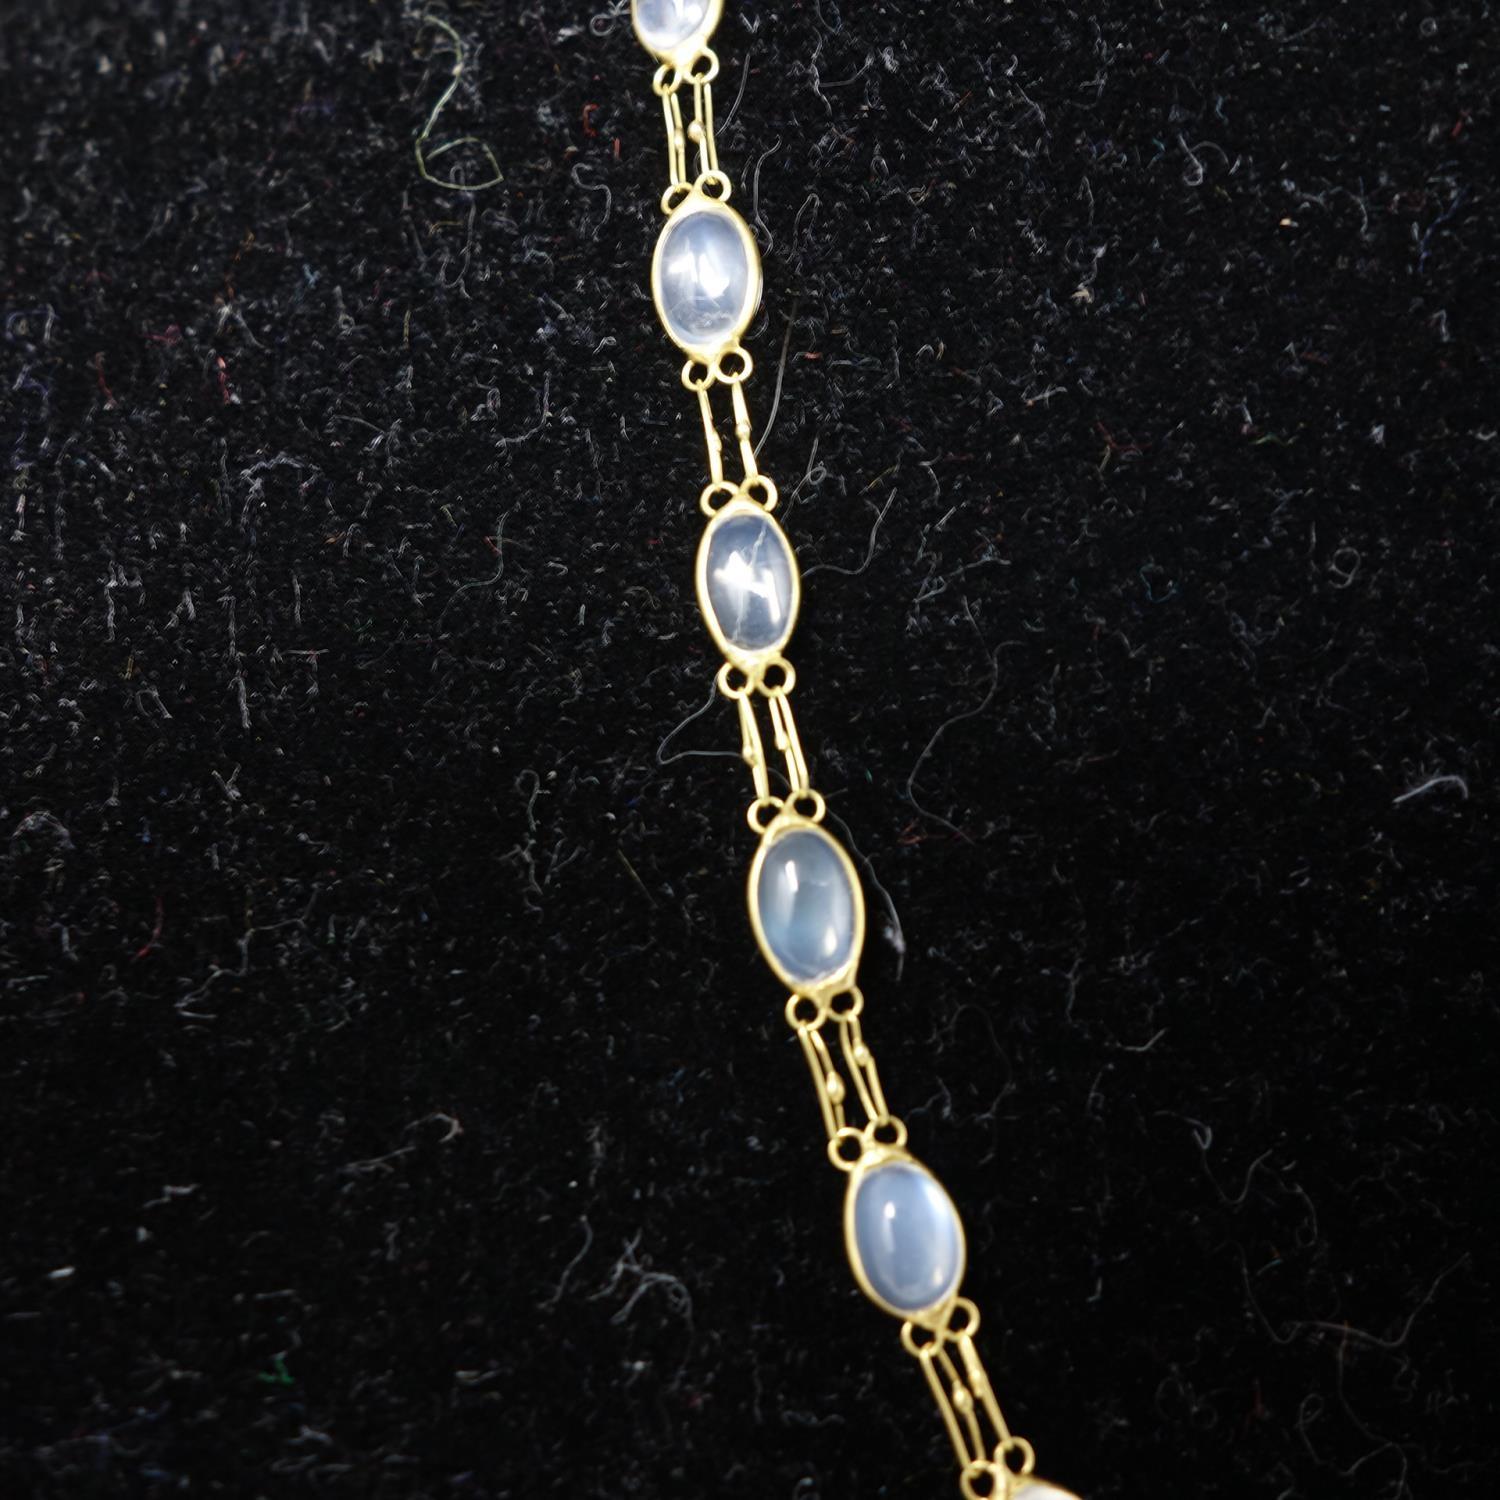 A 14ct gold necklace set with moonstones - Image 2 of 2